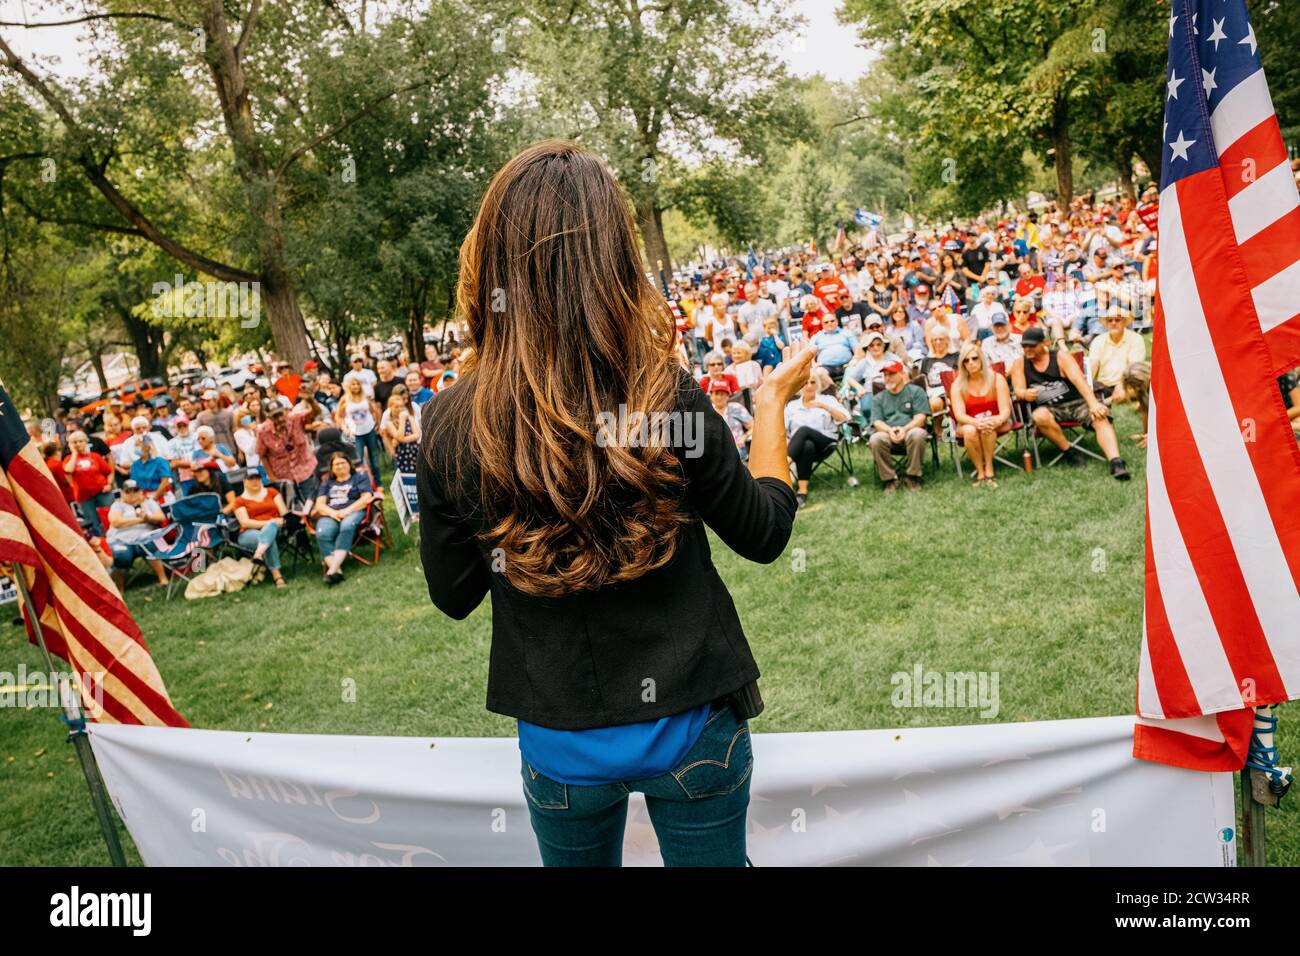 Lauren Boebert gives her stump speech at a political rally in Colorado for the 2020 election. Stock Photo